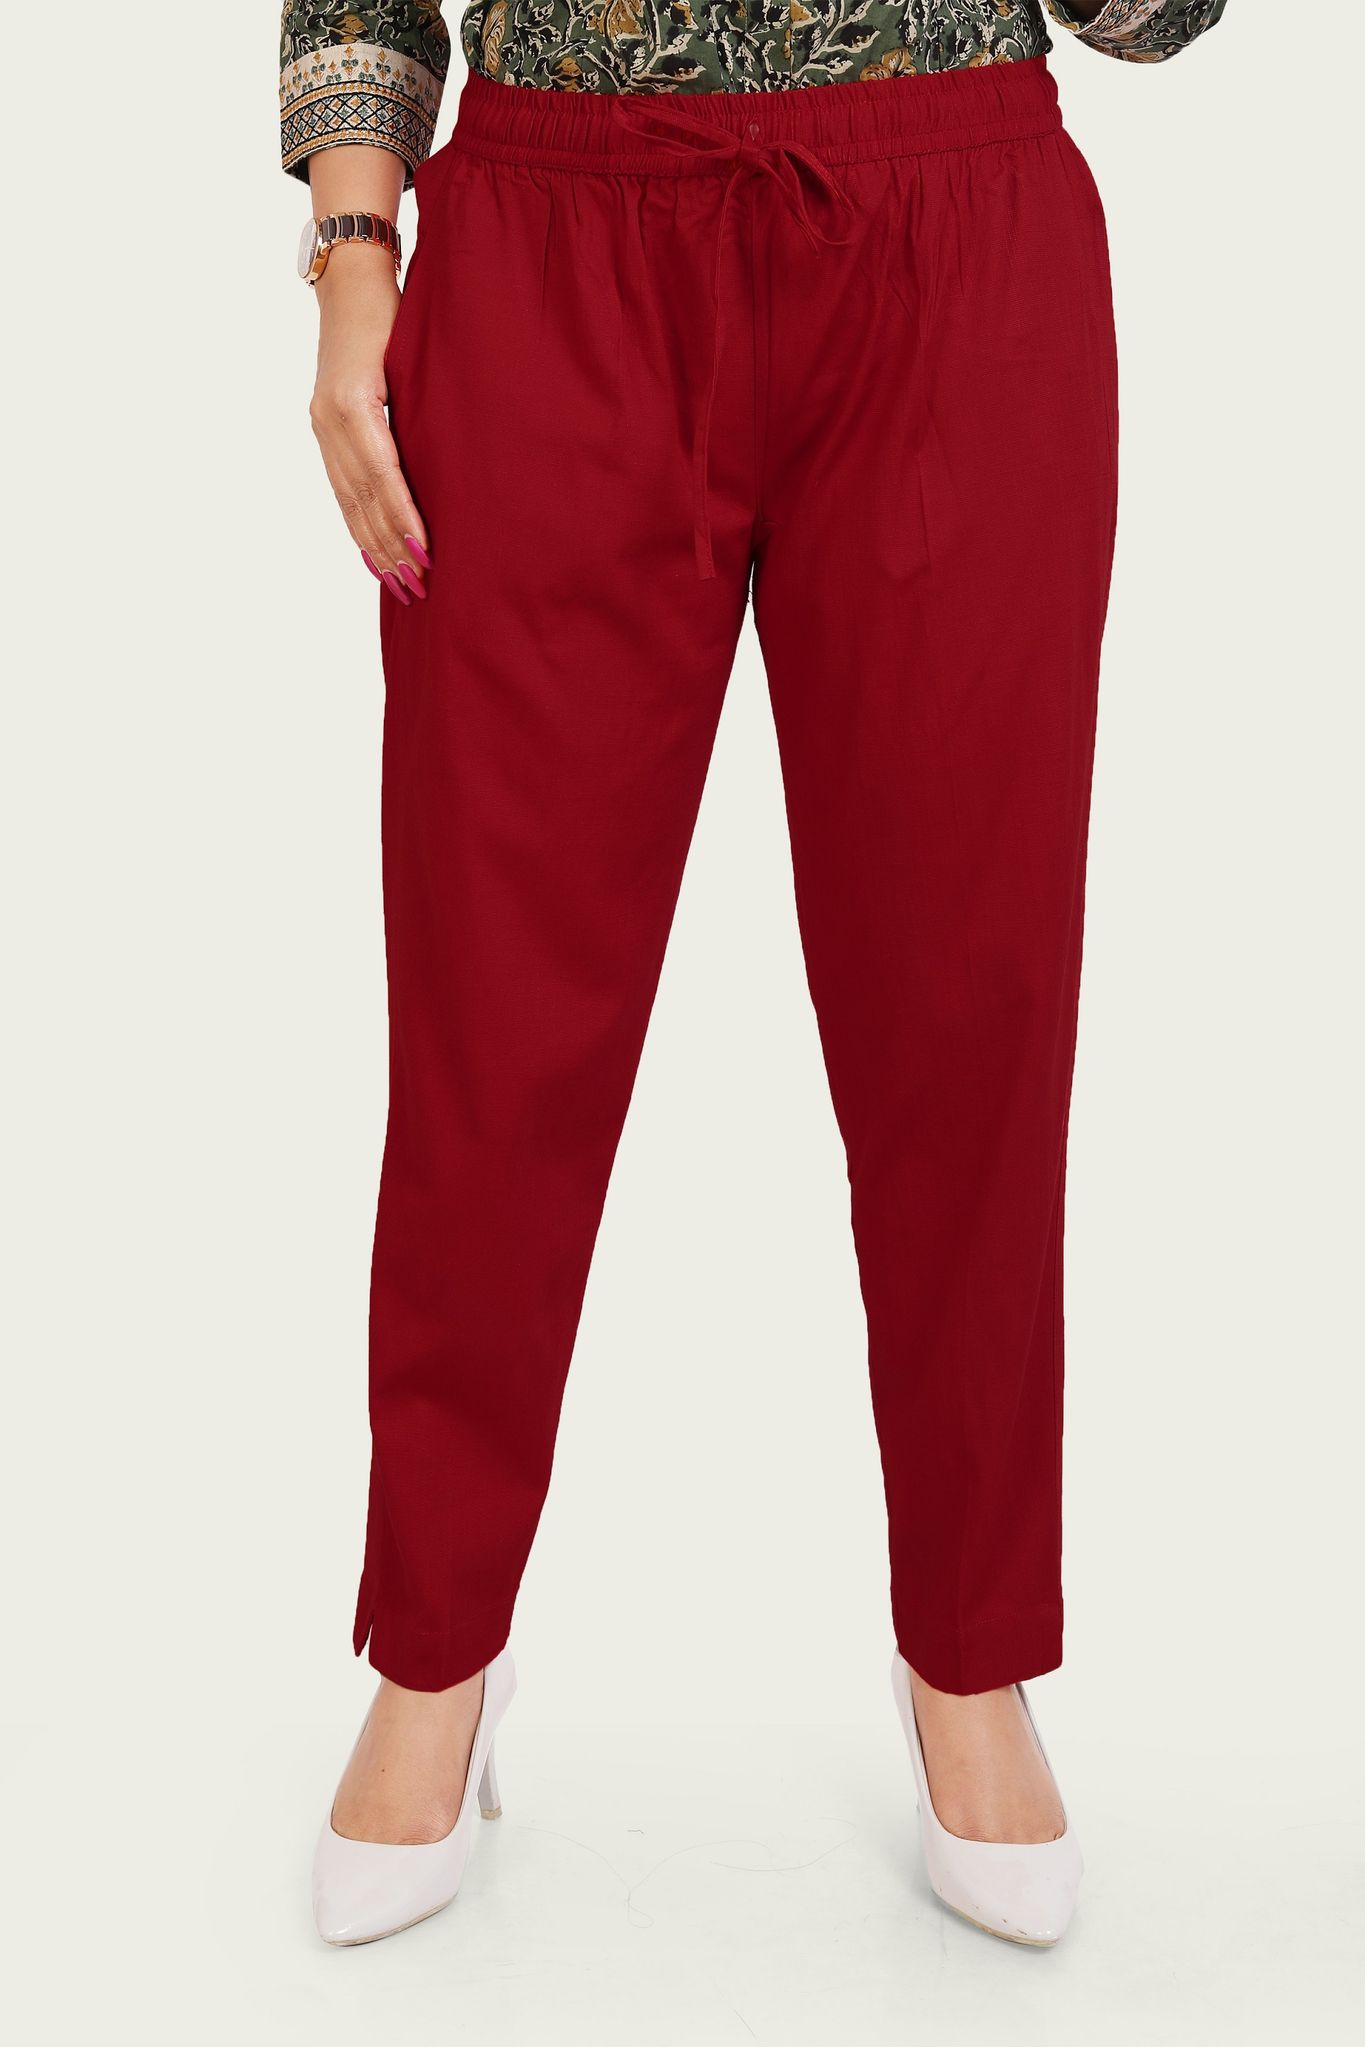 Buy Maroon Casual Wear Resham Work Straight / Trouser Suits Online for  Women in USA